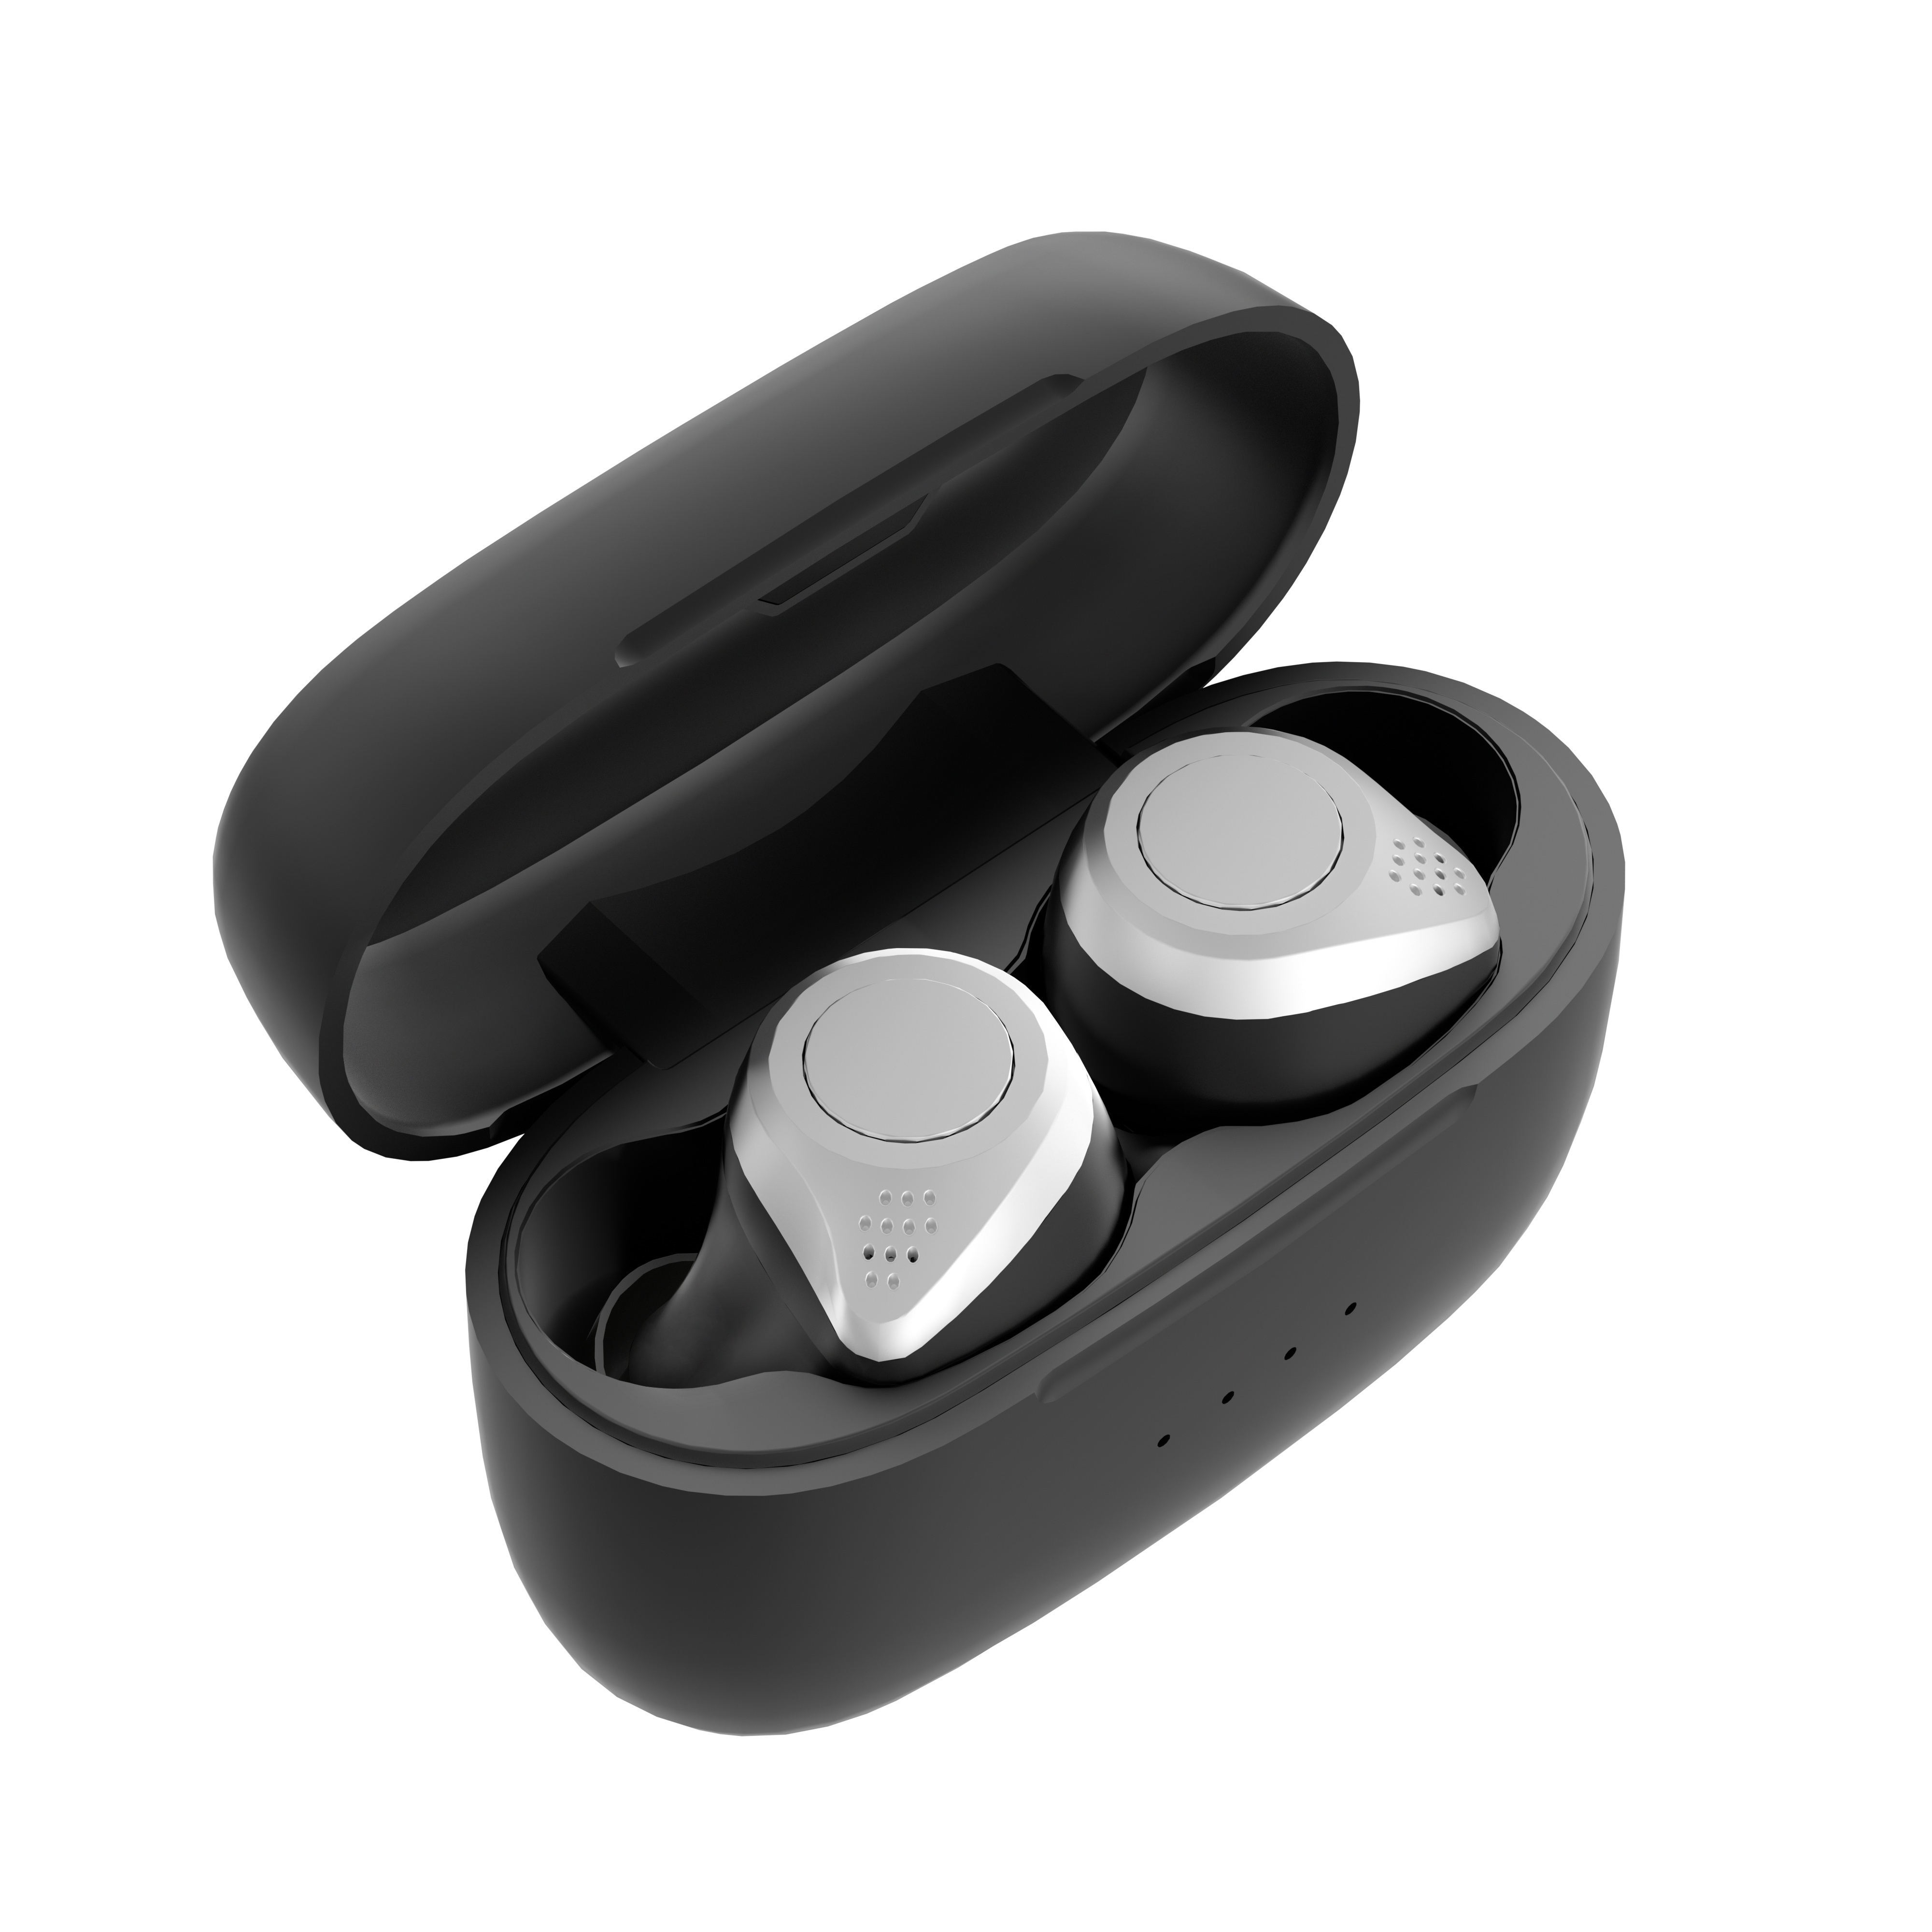 

Elite - Best And Most Advanced Sports Wireless Earbuds With Comfortable Secure Fit, Active Noise Cancellation, Dolby Surround Sound Black Silver